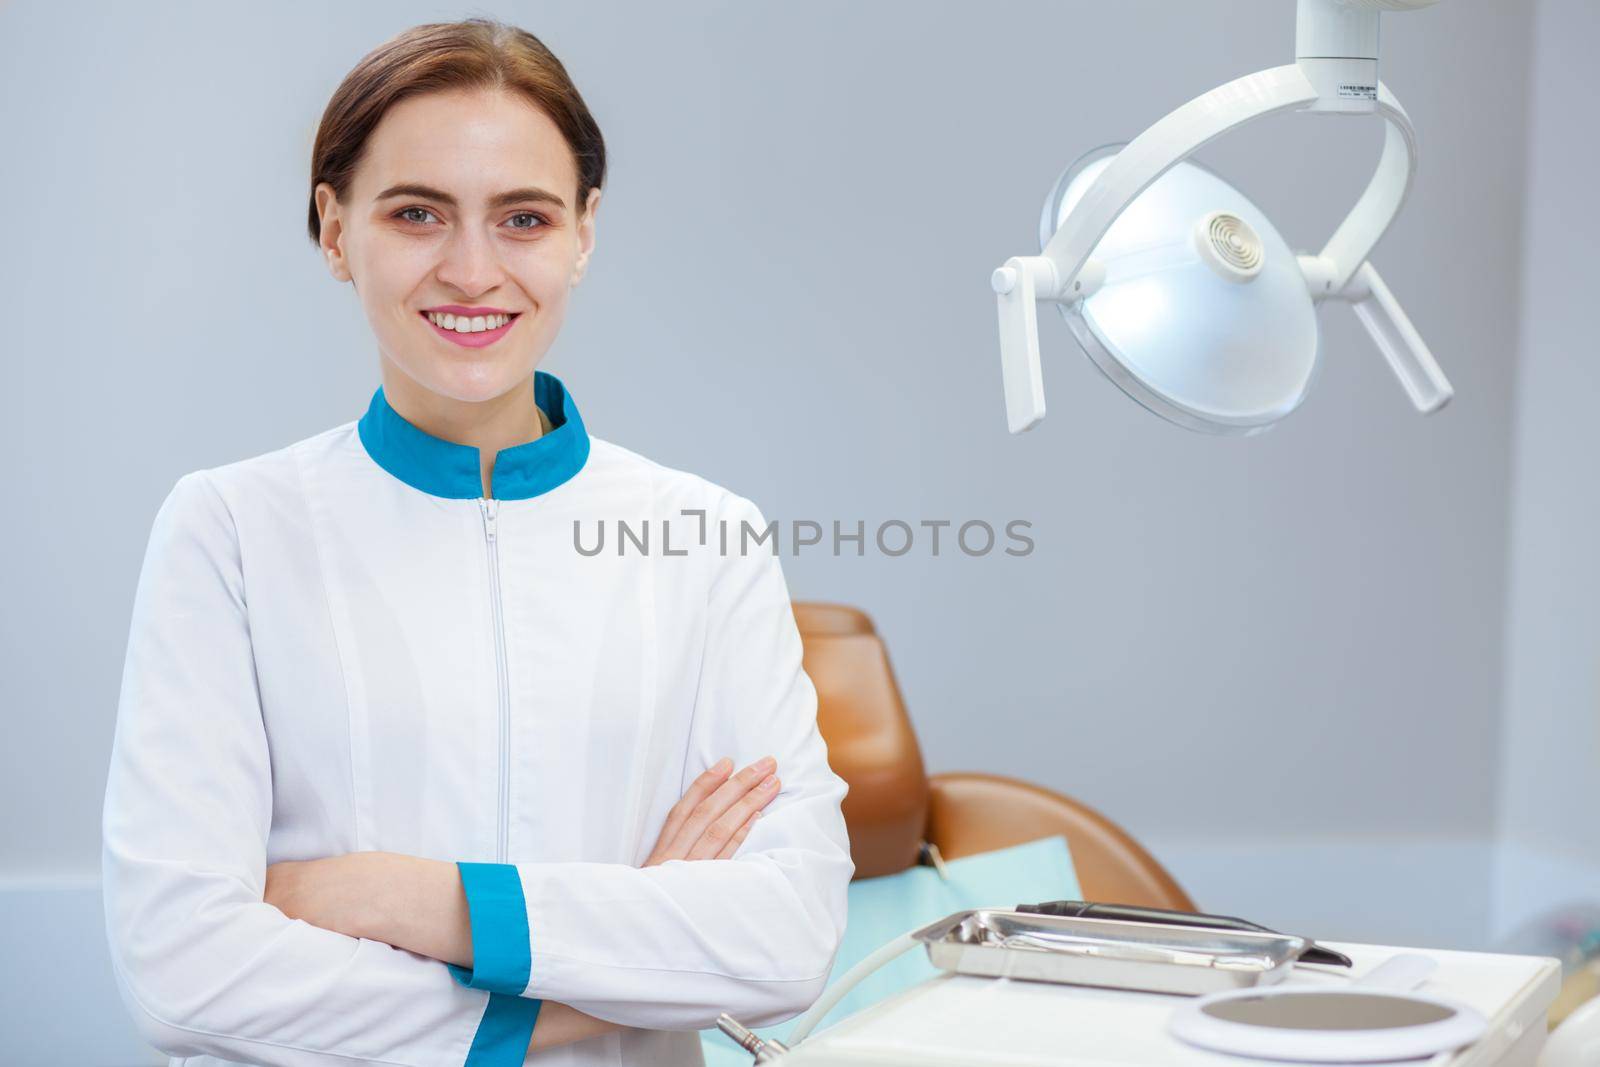 Portrait of a happy beautiful female dentist posing proudly at her dental clinic, copy space. Cheerful dentist in uniform smiling confidently to the camera with her arms crossed. Medicine, health